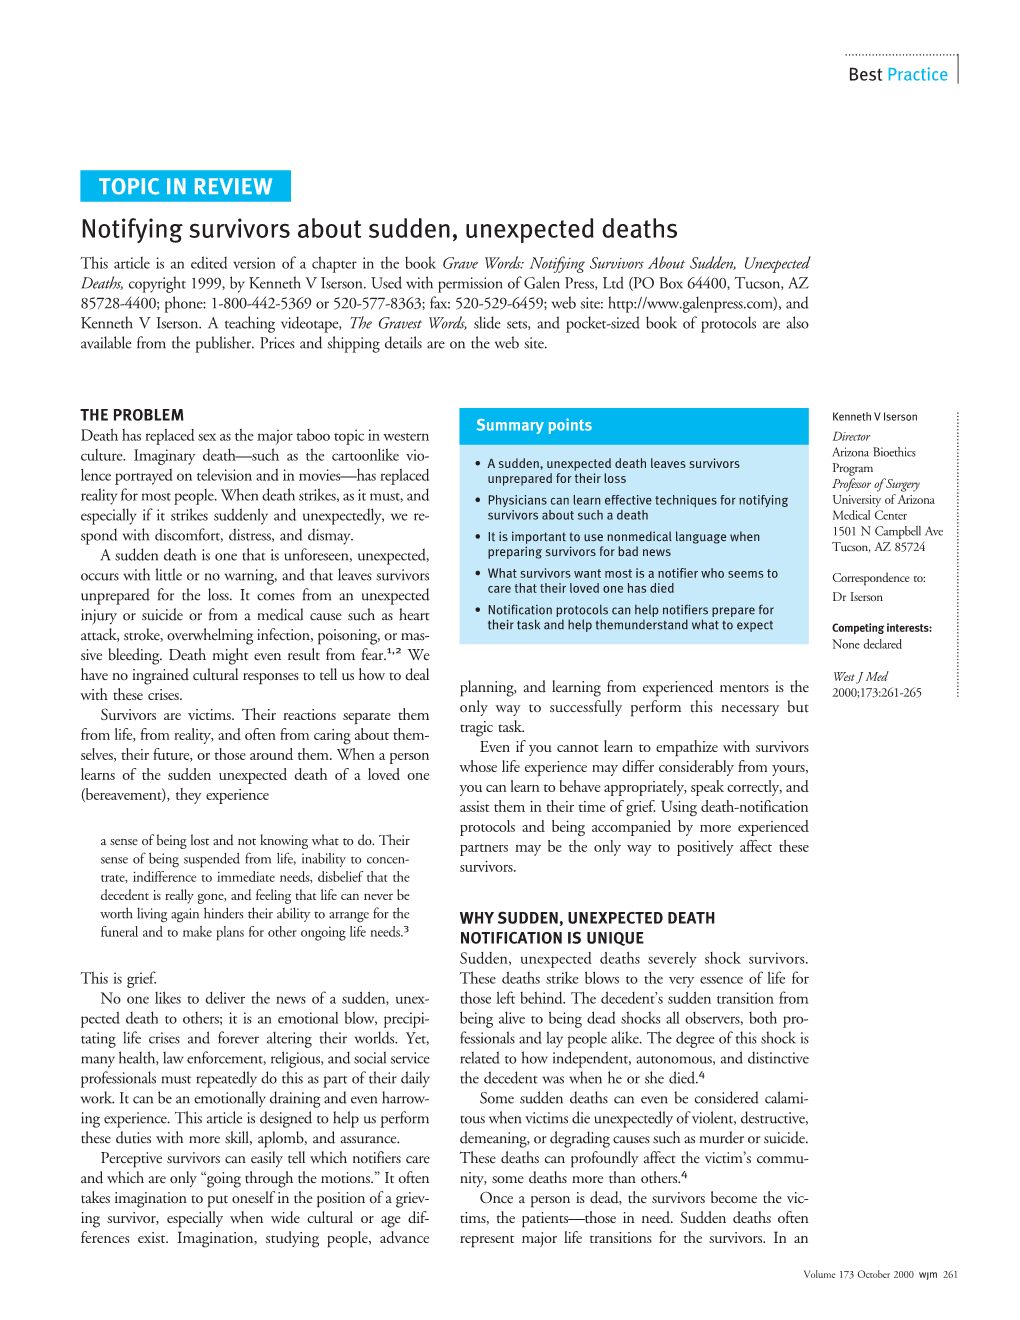 Notifying Survivors About Sudden, Unexpected Deaths